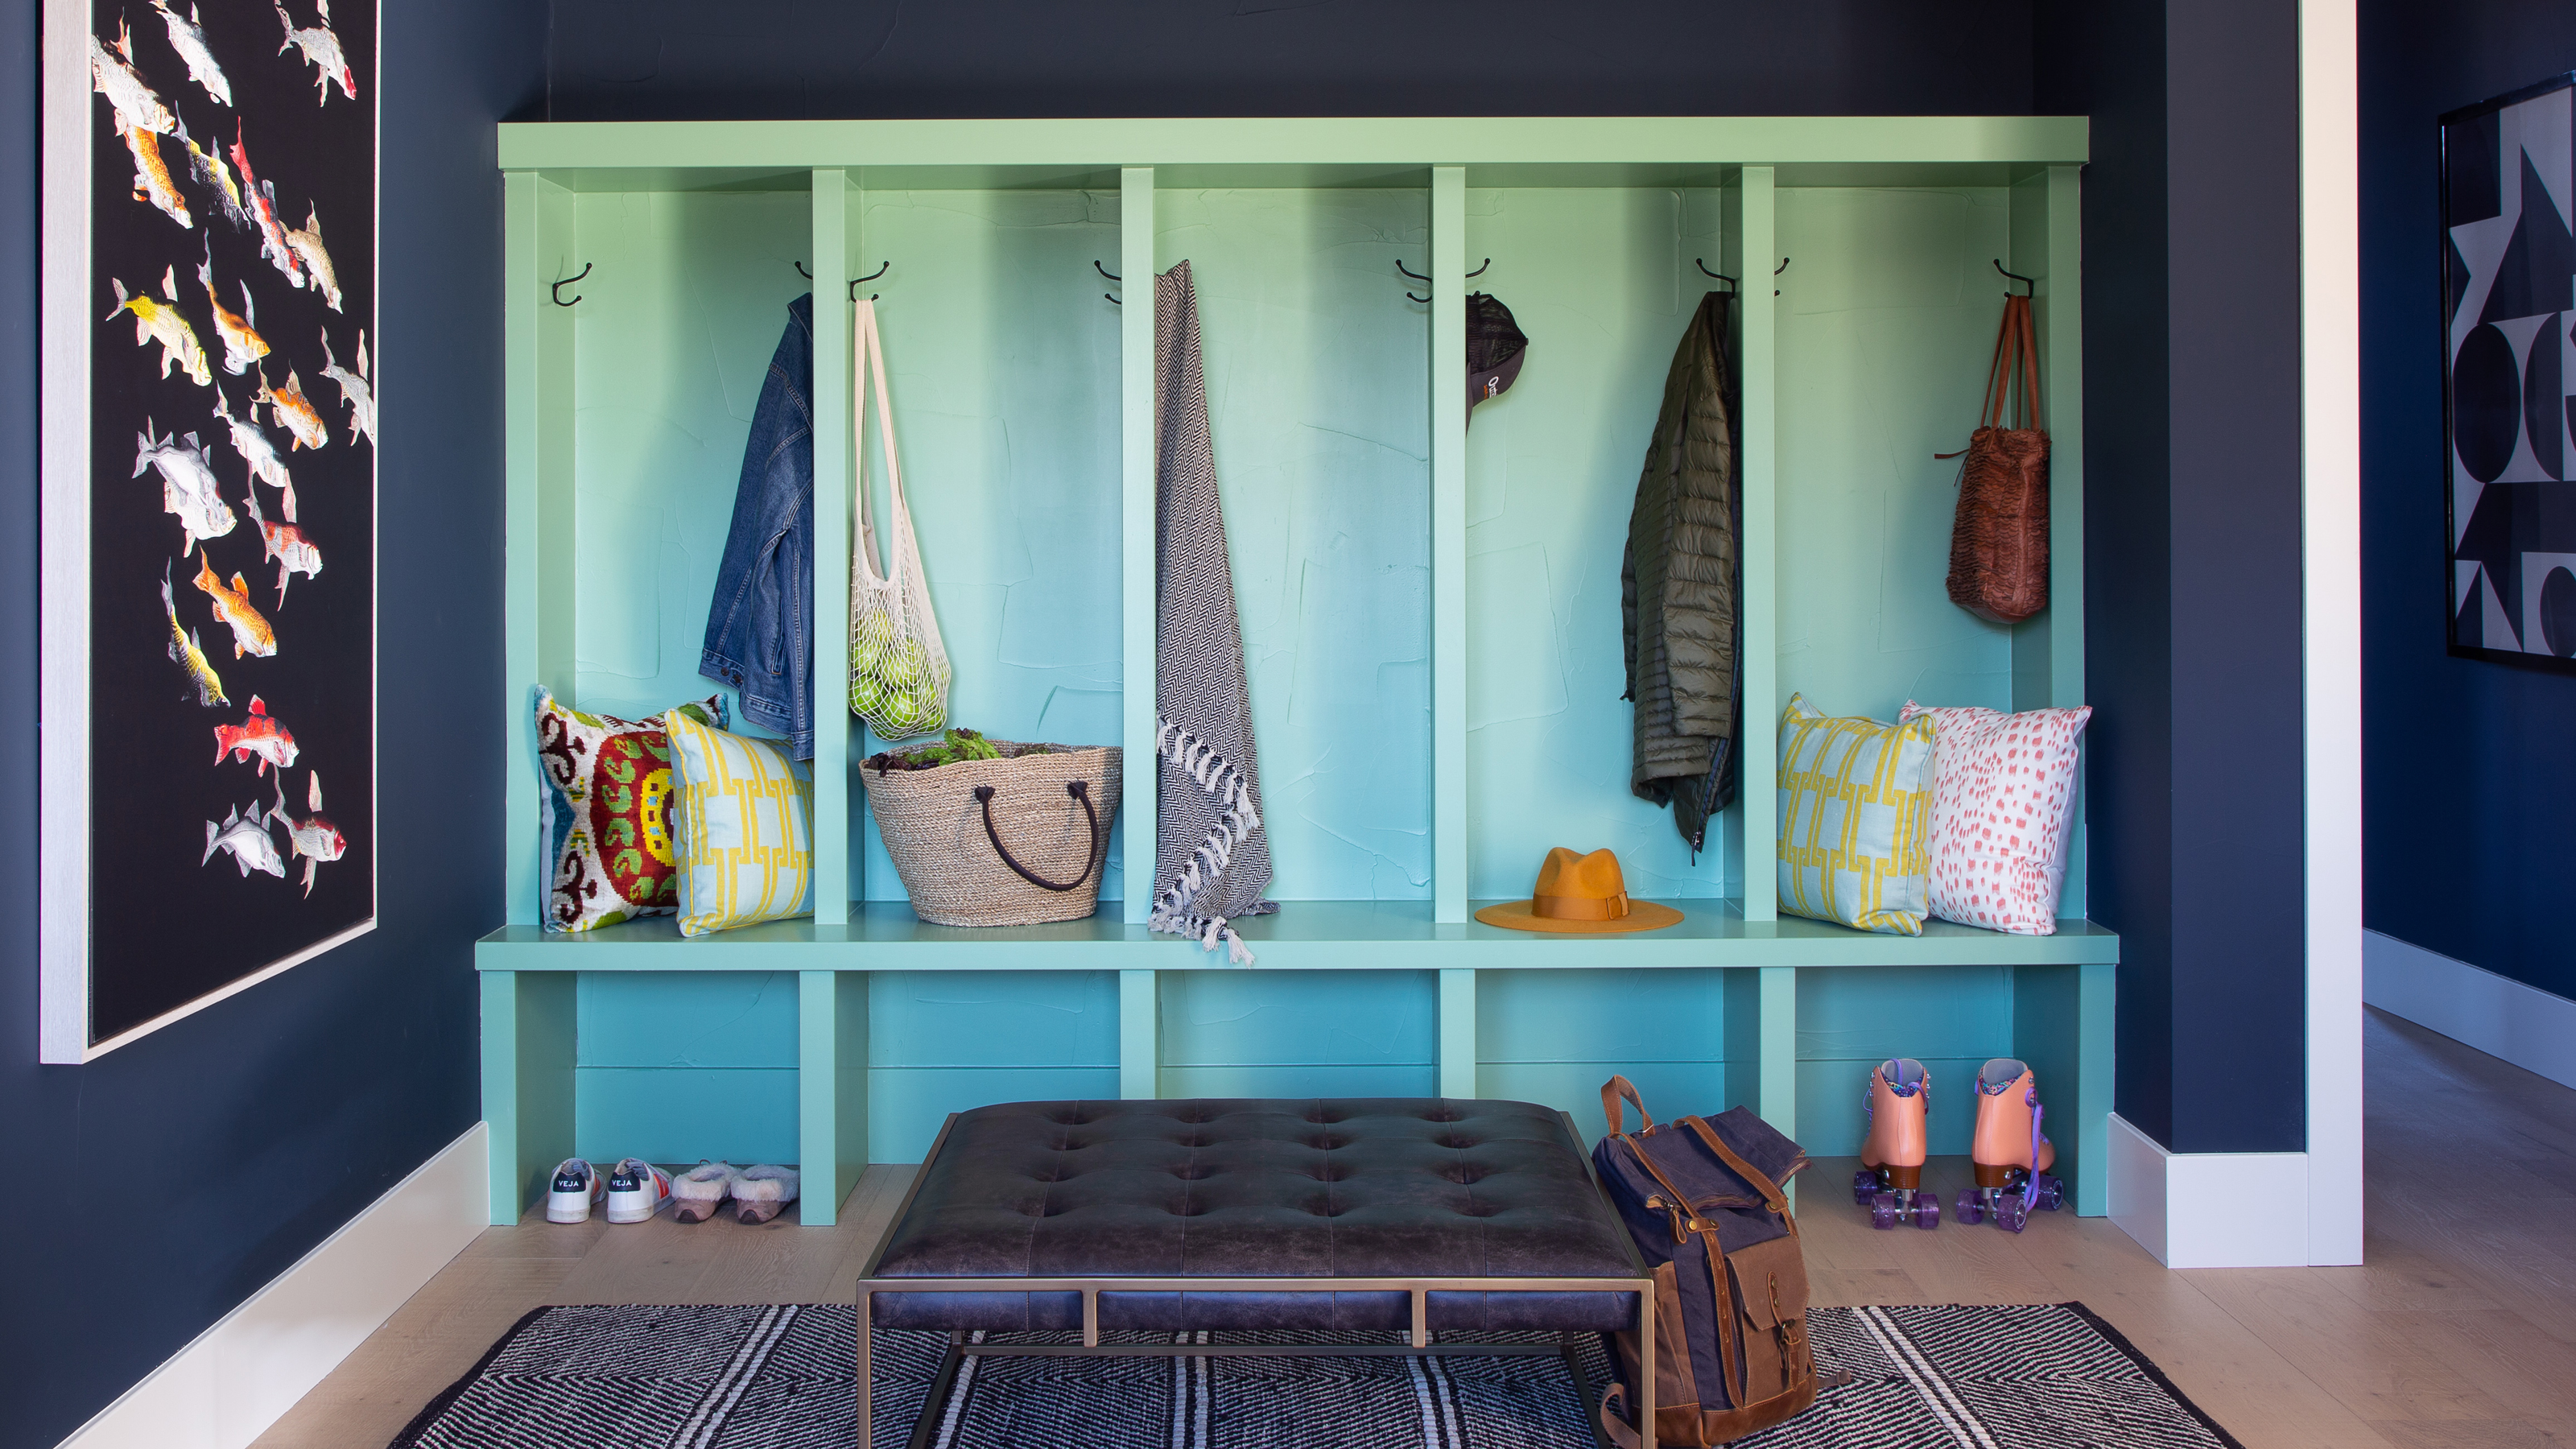 How to design a small mudroom - Green With Decor